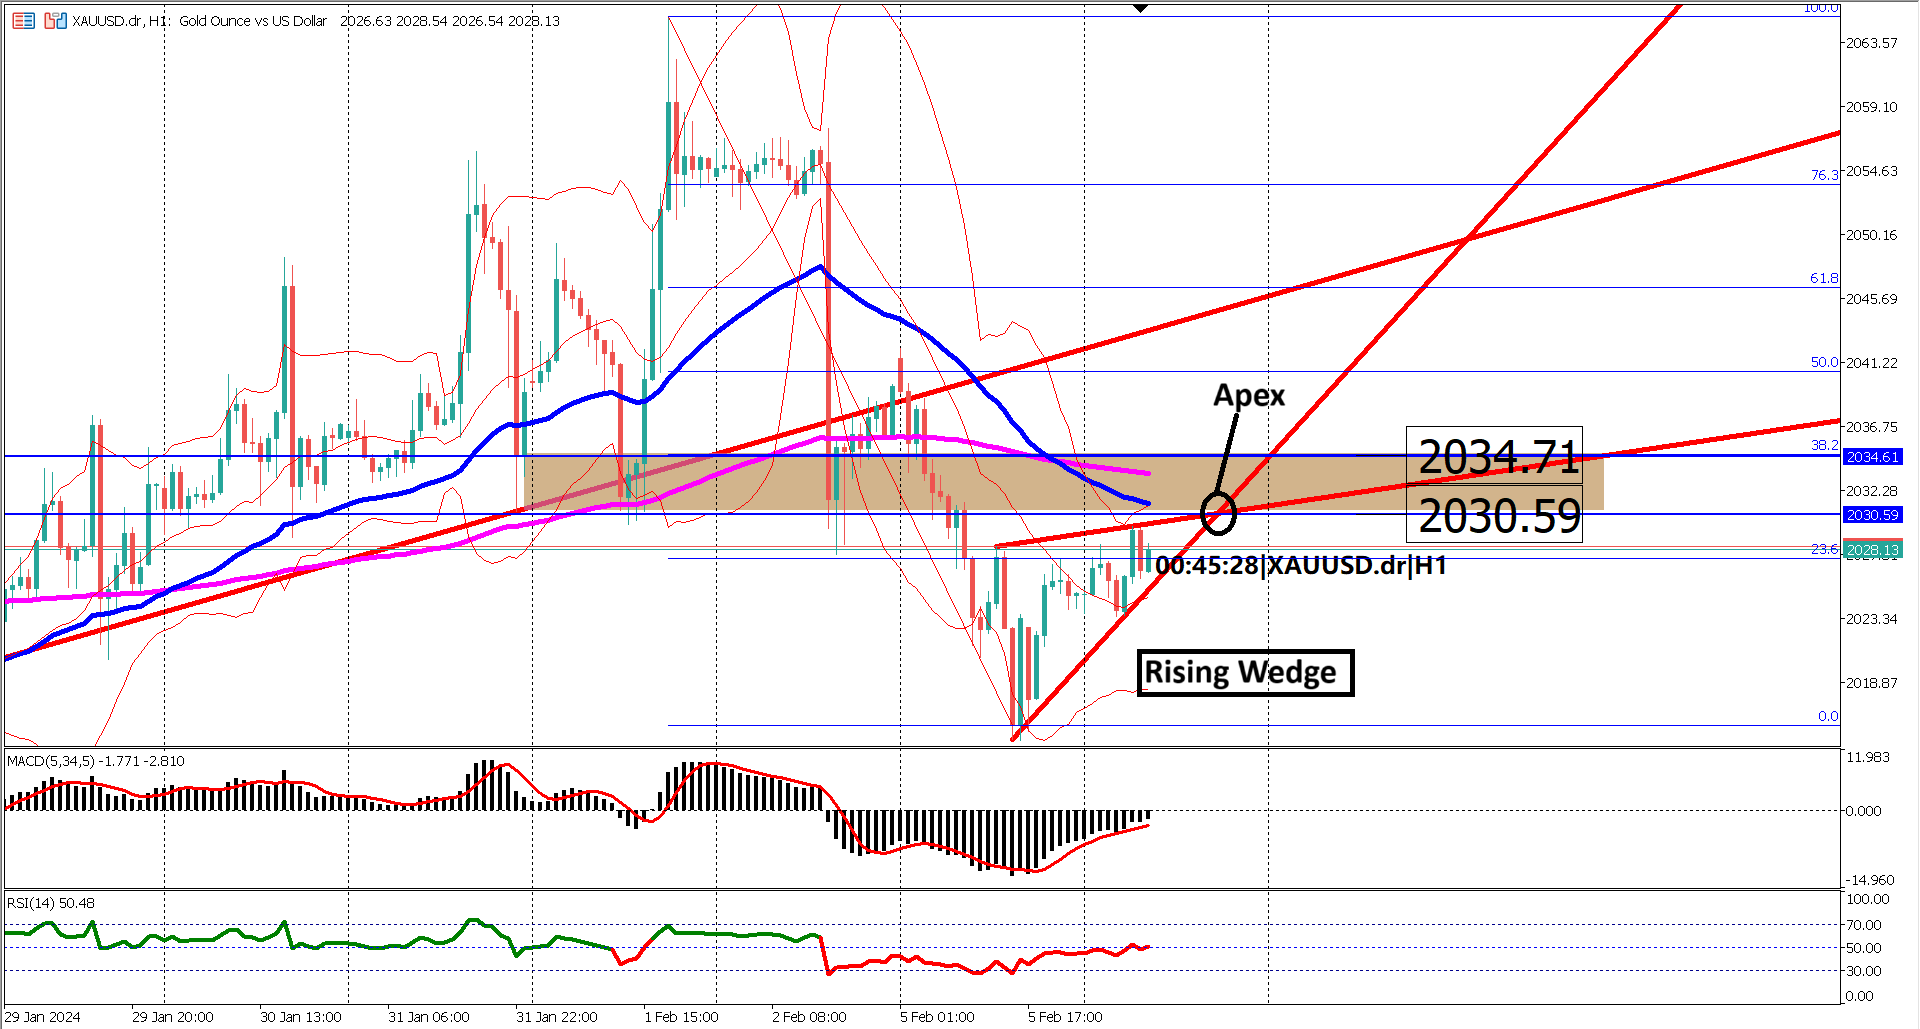 Rising Wedge Pattern Forms on XAUUSD - Will $2030 Act as Strong Resistance?